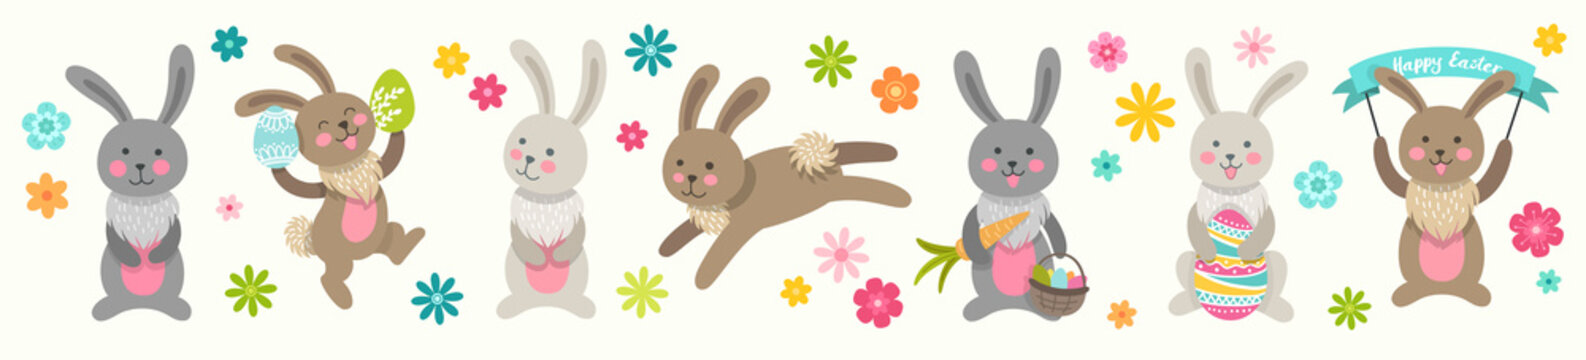 Set of cute Easter cartoon characters rabbits and design elements flowers. Easter bunny and flowers. Vector illustration